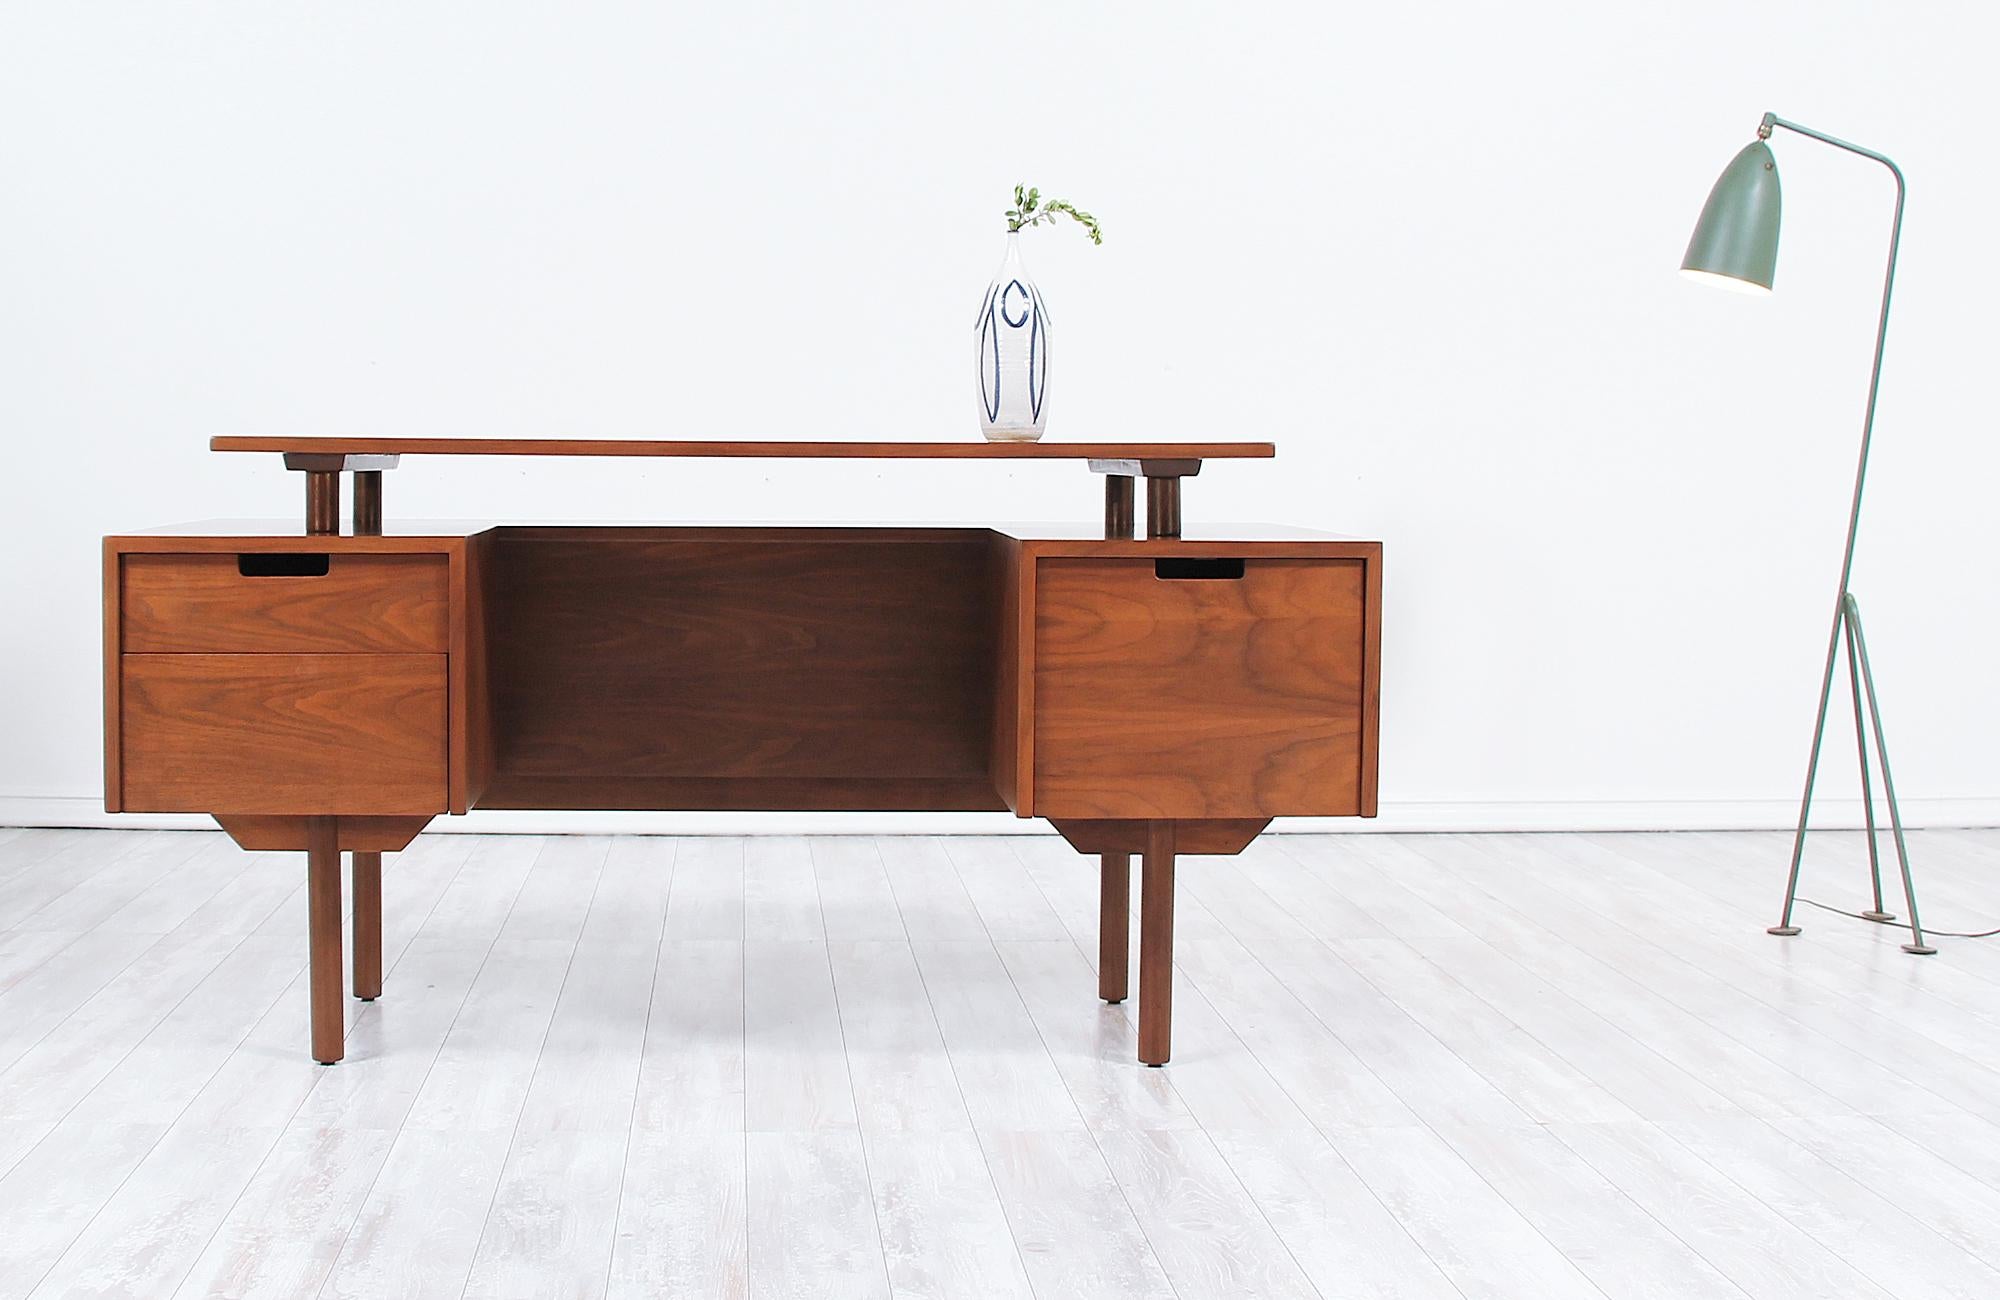 Mid-Century Modern desk designed by Milo Baughman for Glenn of California in the United States circa 1950s. This exceptionally crafted modern desk features a sturdy walnut wood frame with four cylindric feet and three front drawers with an open back